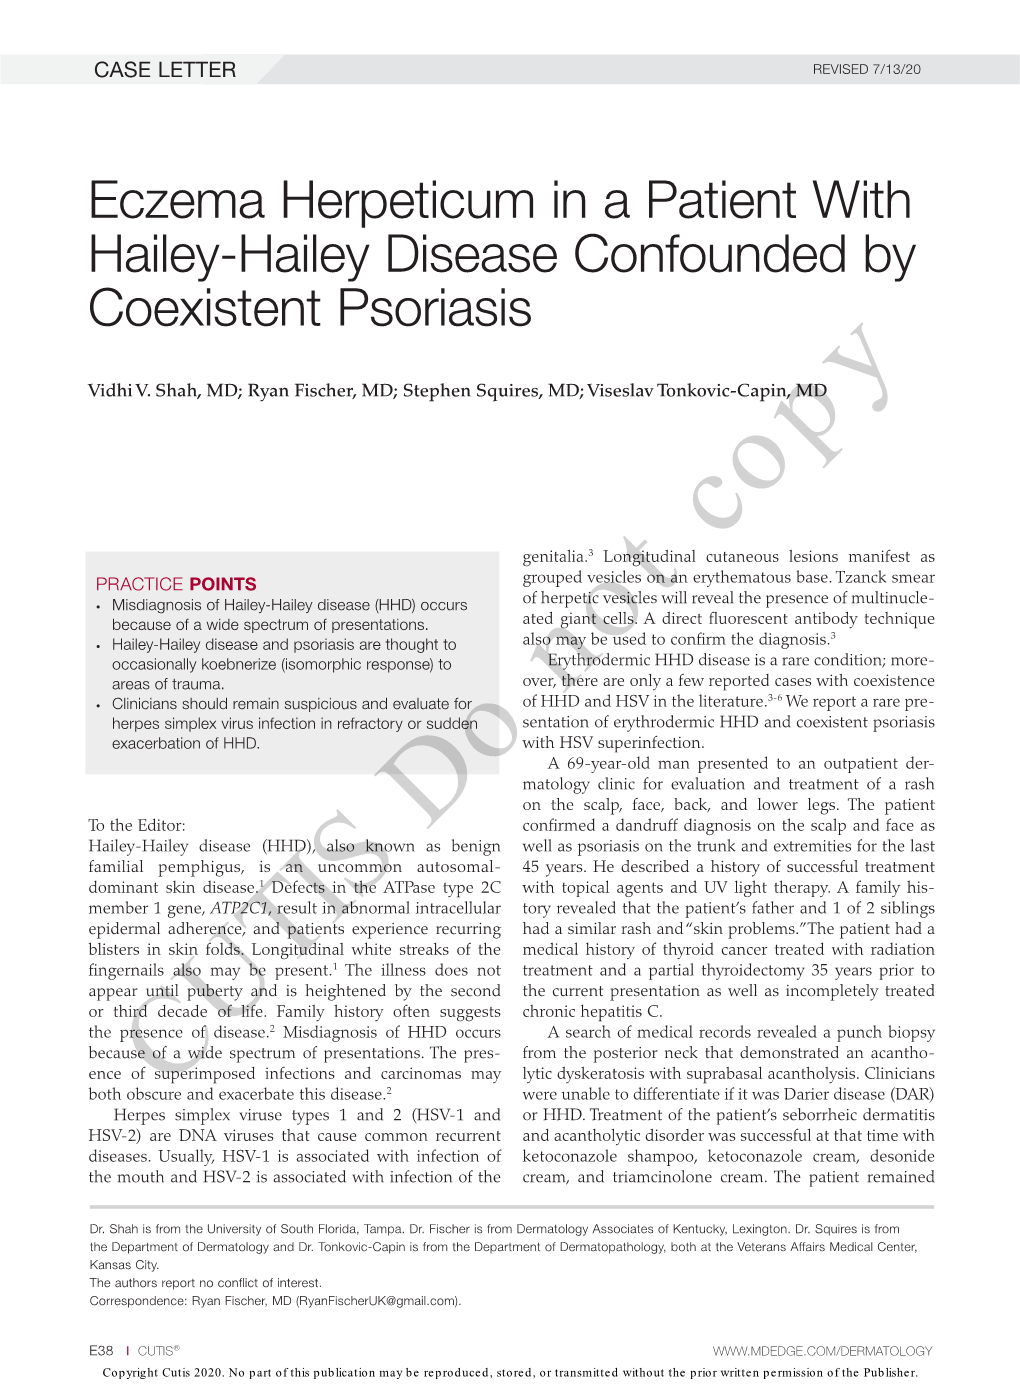 Eczema Herpeticum in a Patient with Hailey-Hailey Disease Confounded by Coexistent Psoriasis